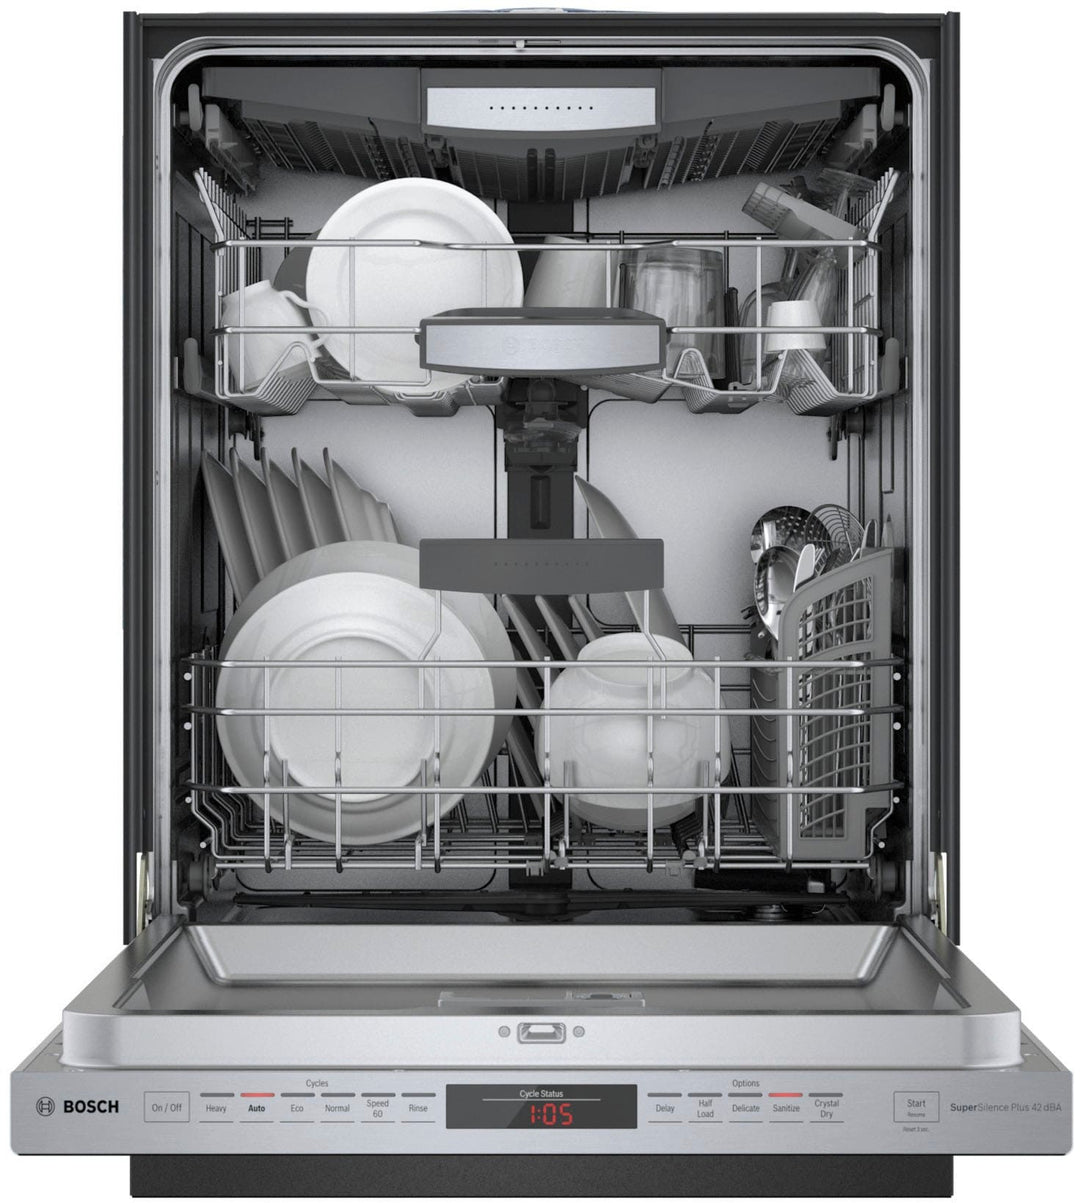 Bosch - 500 Series 24" Top Control Built-In Dishwasher with AutoAir, Stainless Steel Tub, 3rd Rack, 44 dBa - Stainless steel_5